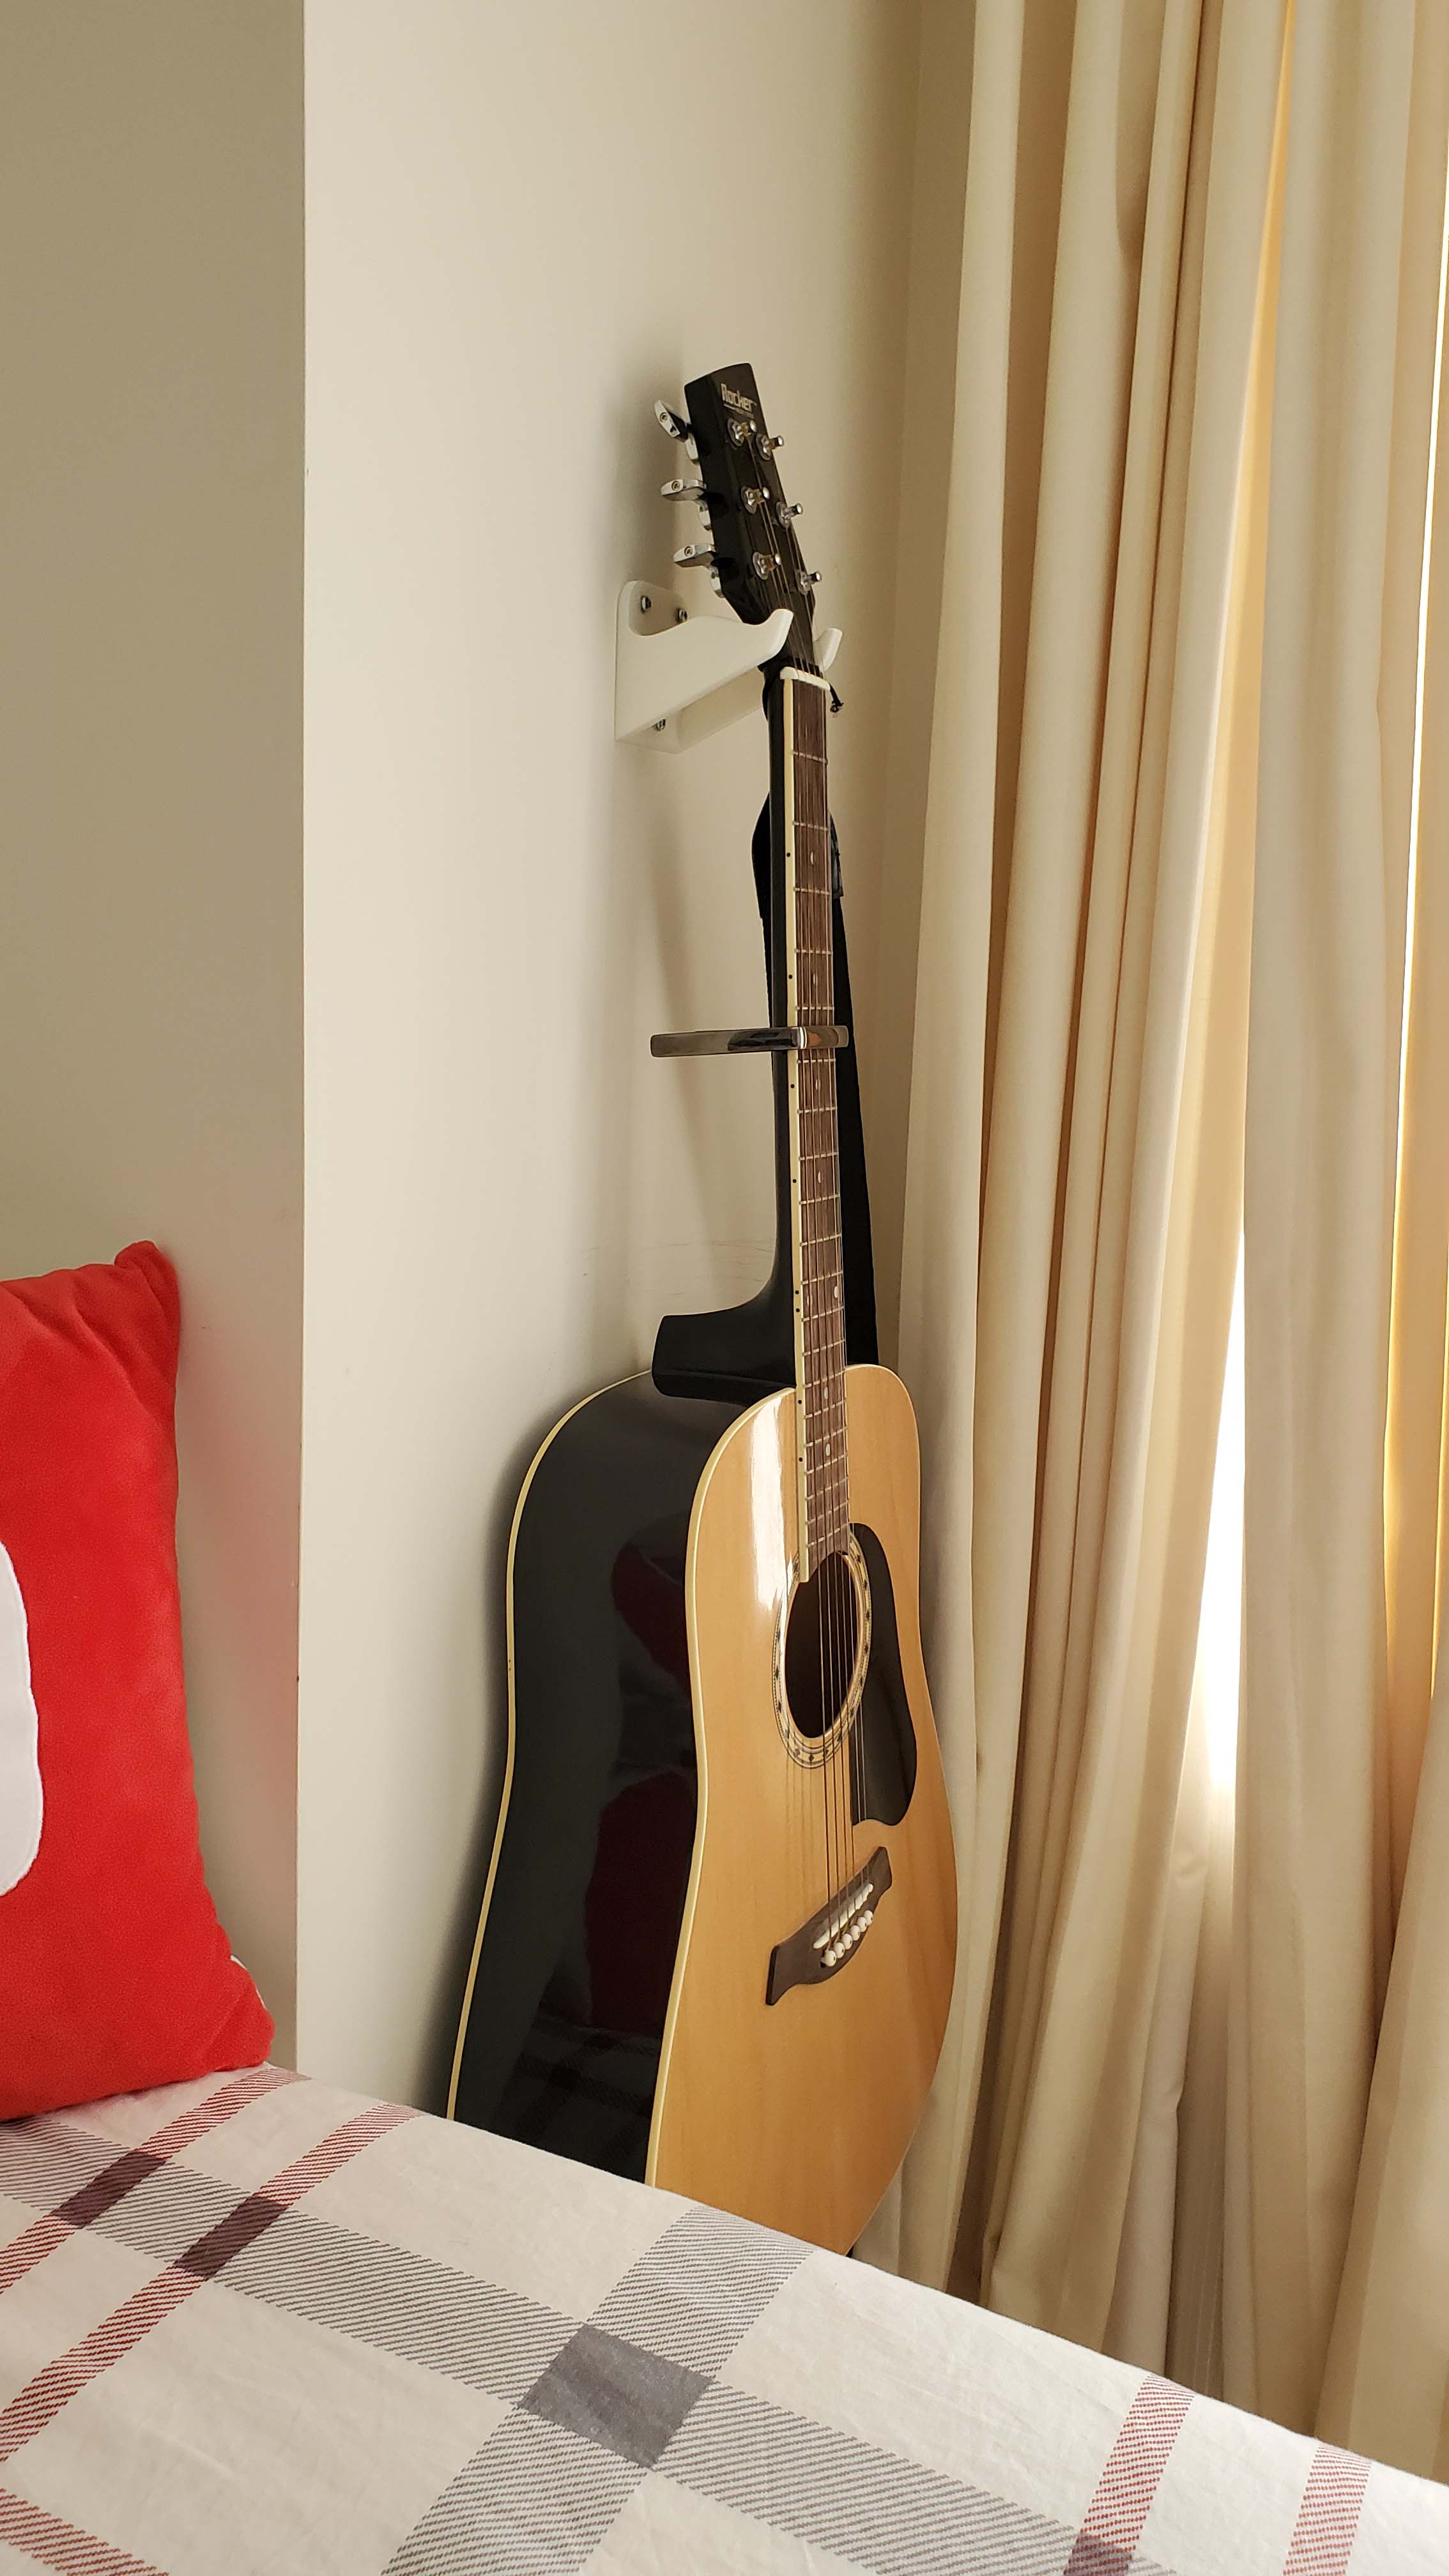 Stronger Guitar wall mount with original holes